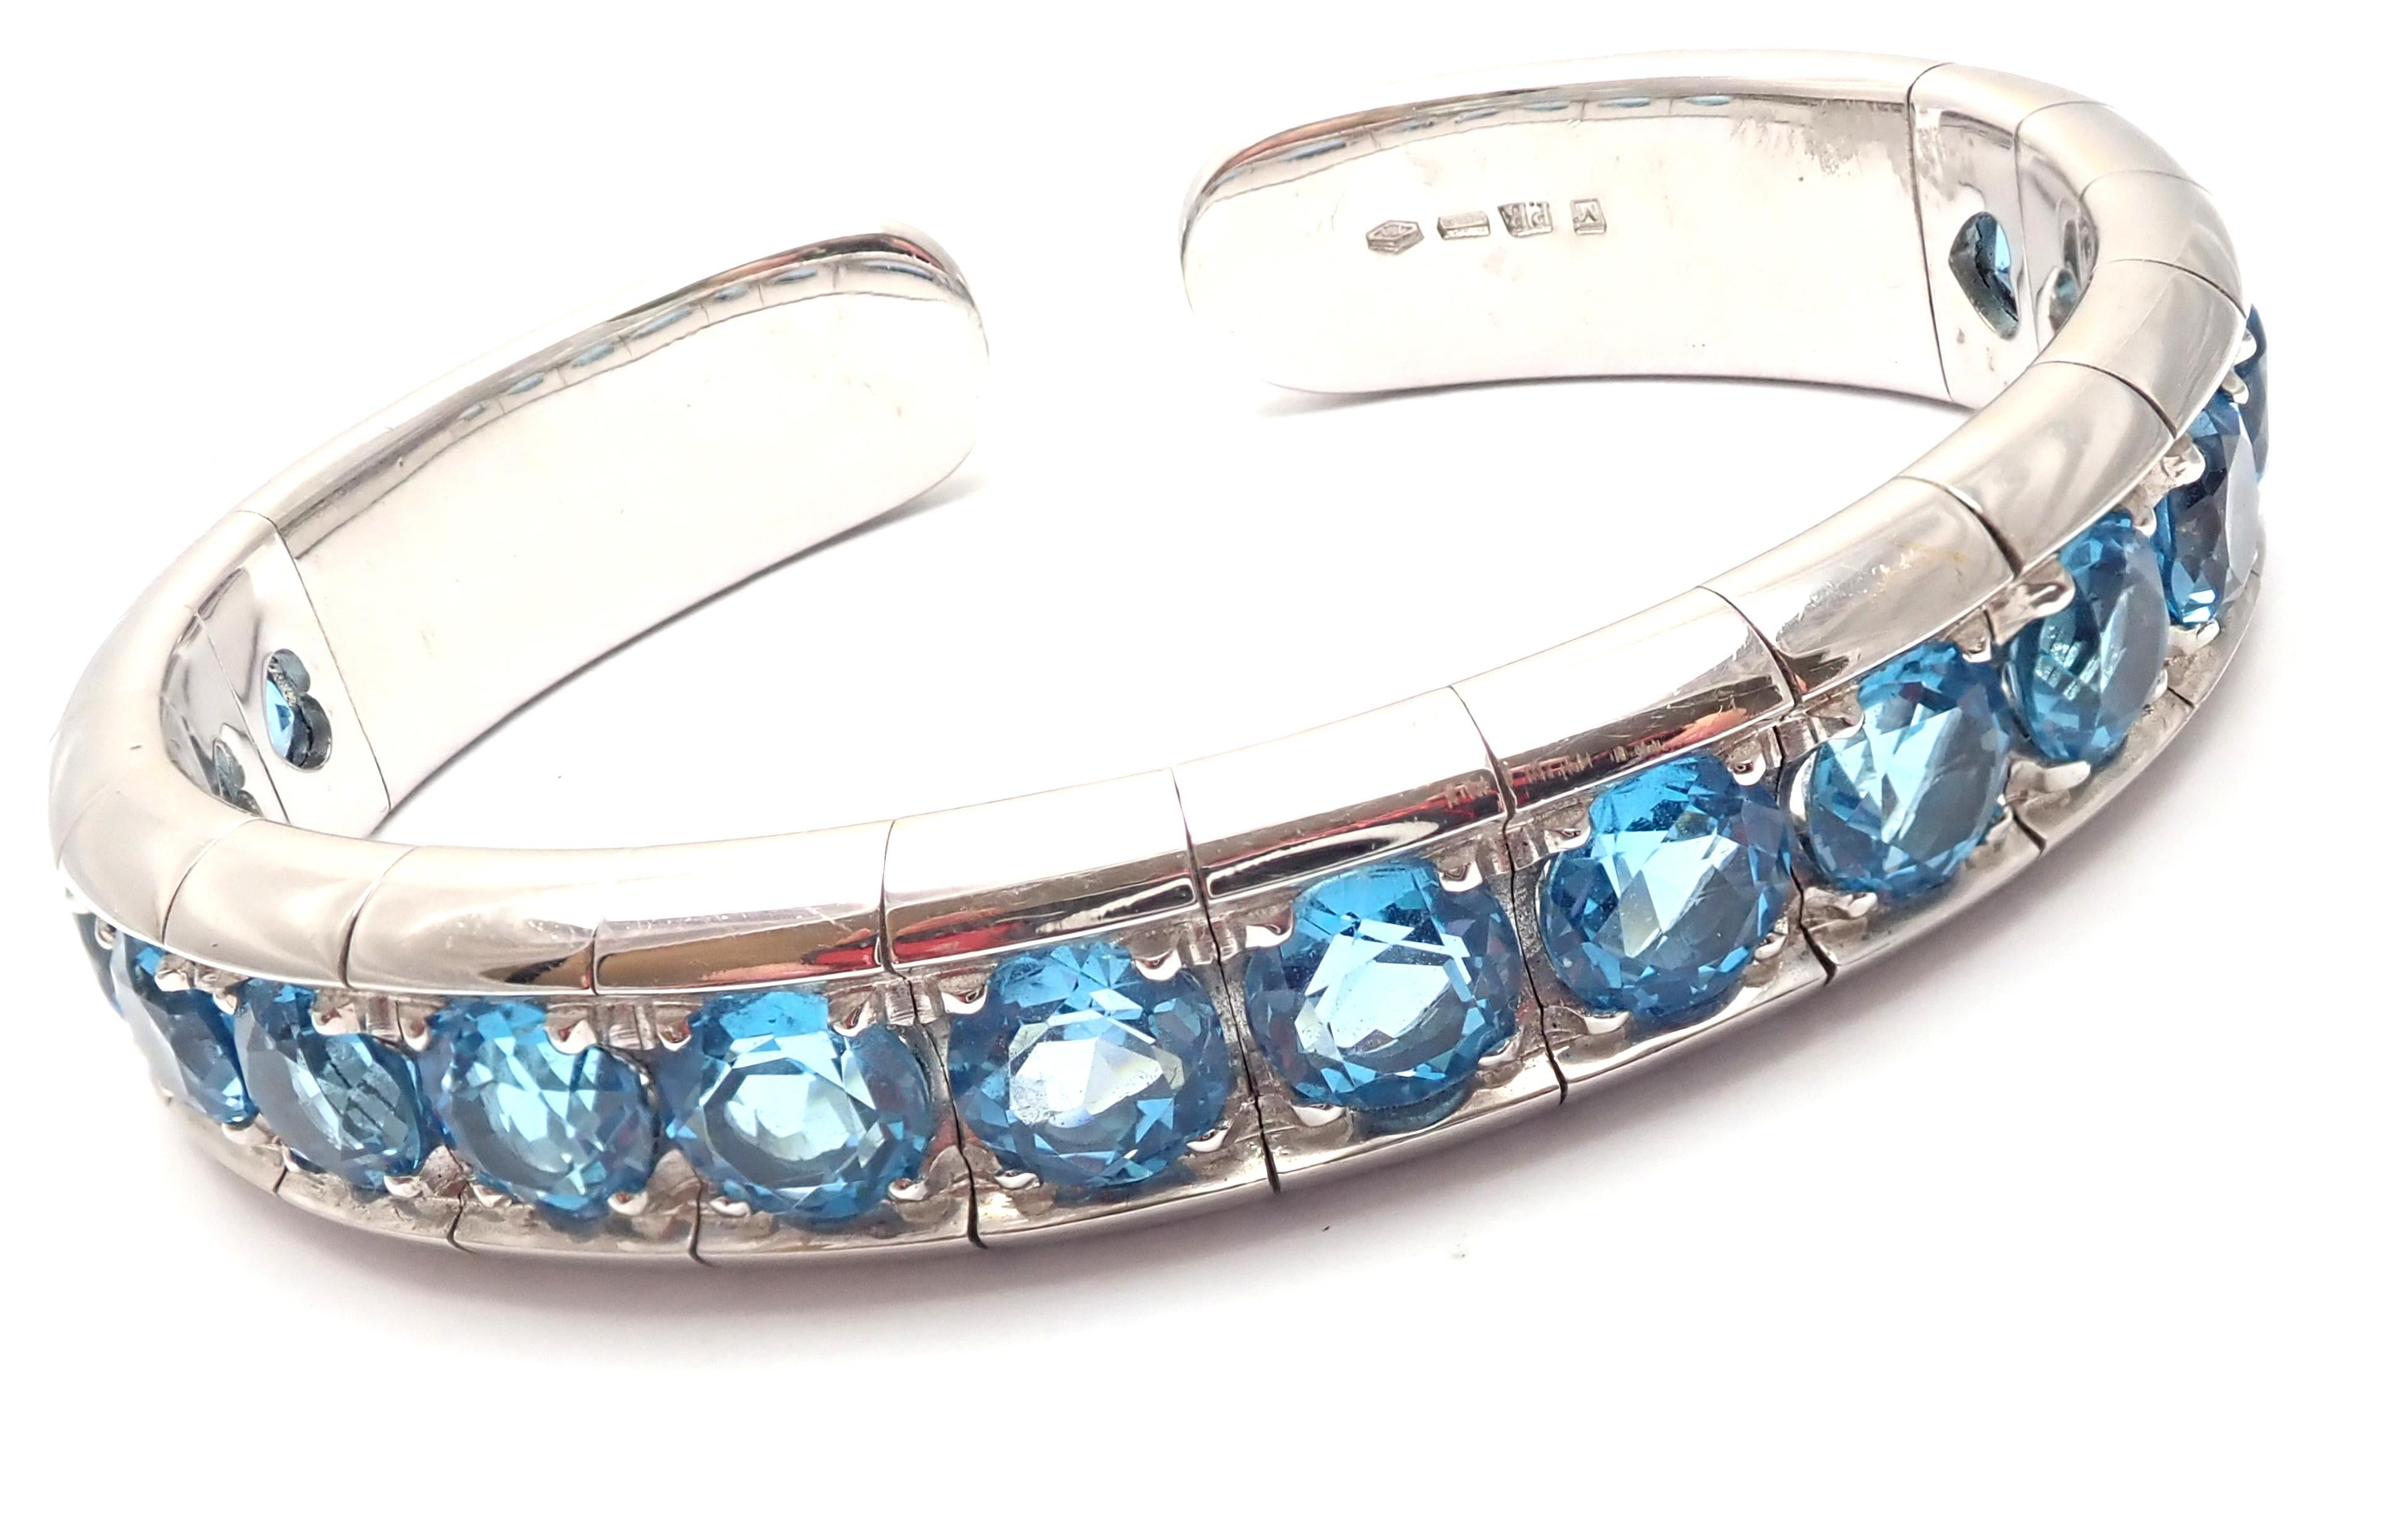 18k White Gold Blue Topaz Bangle Bracelet by Pasquale Bruni. 
With 16 round blue topaz stones.
This necklace comes with Box and Certificate.
Details: 
Measurements: 7